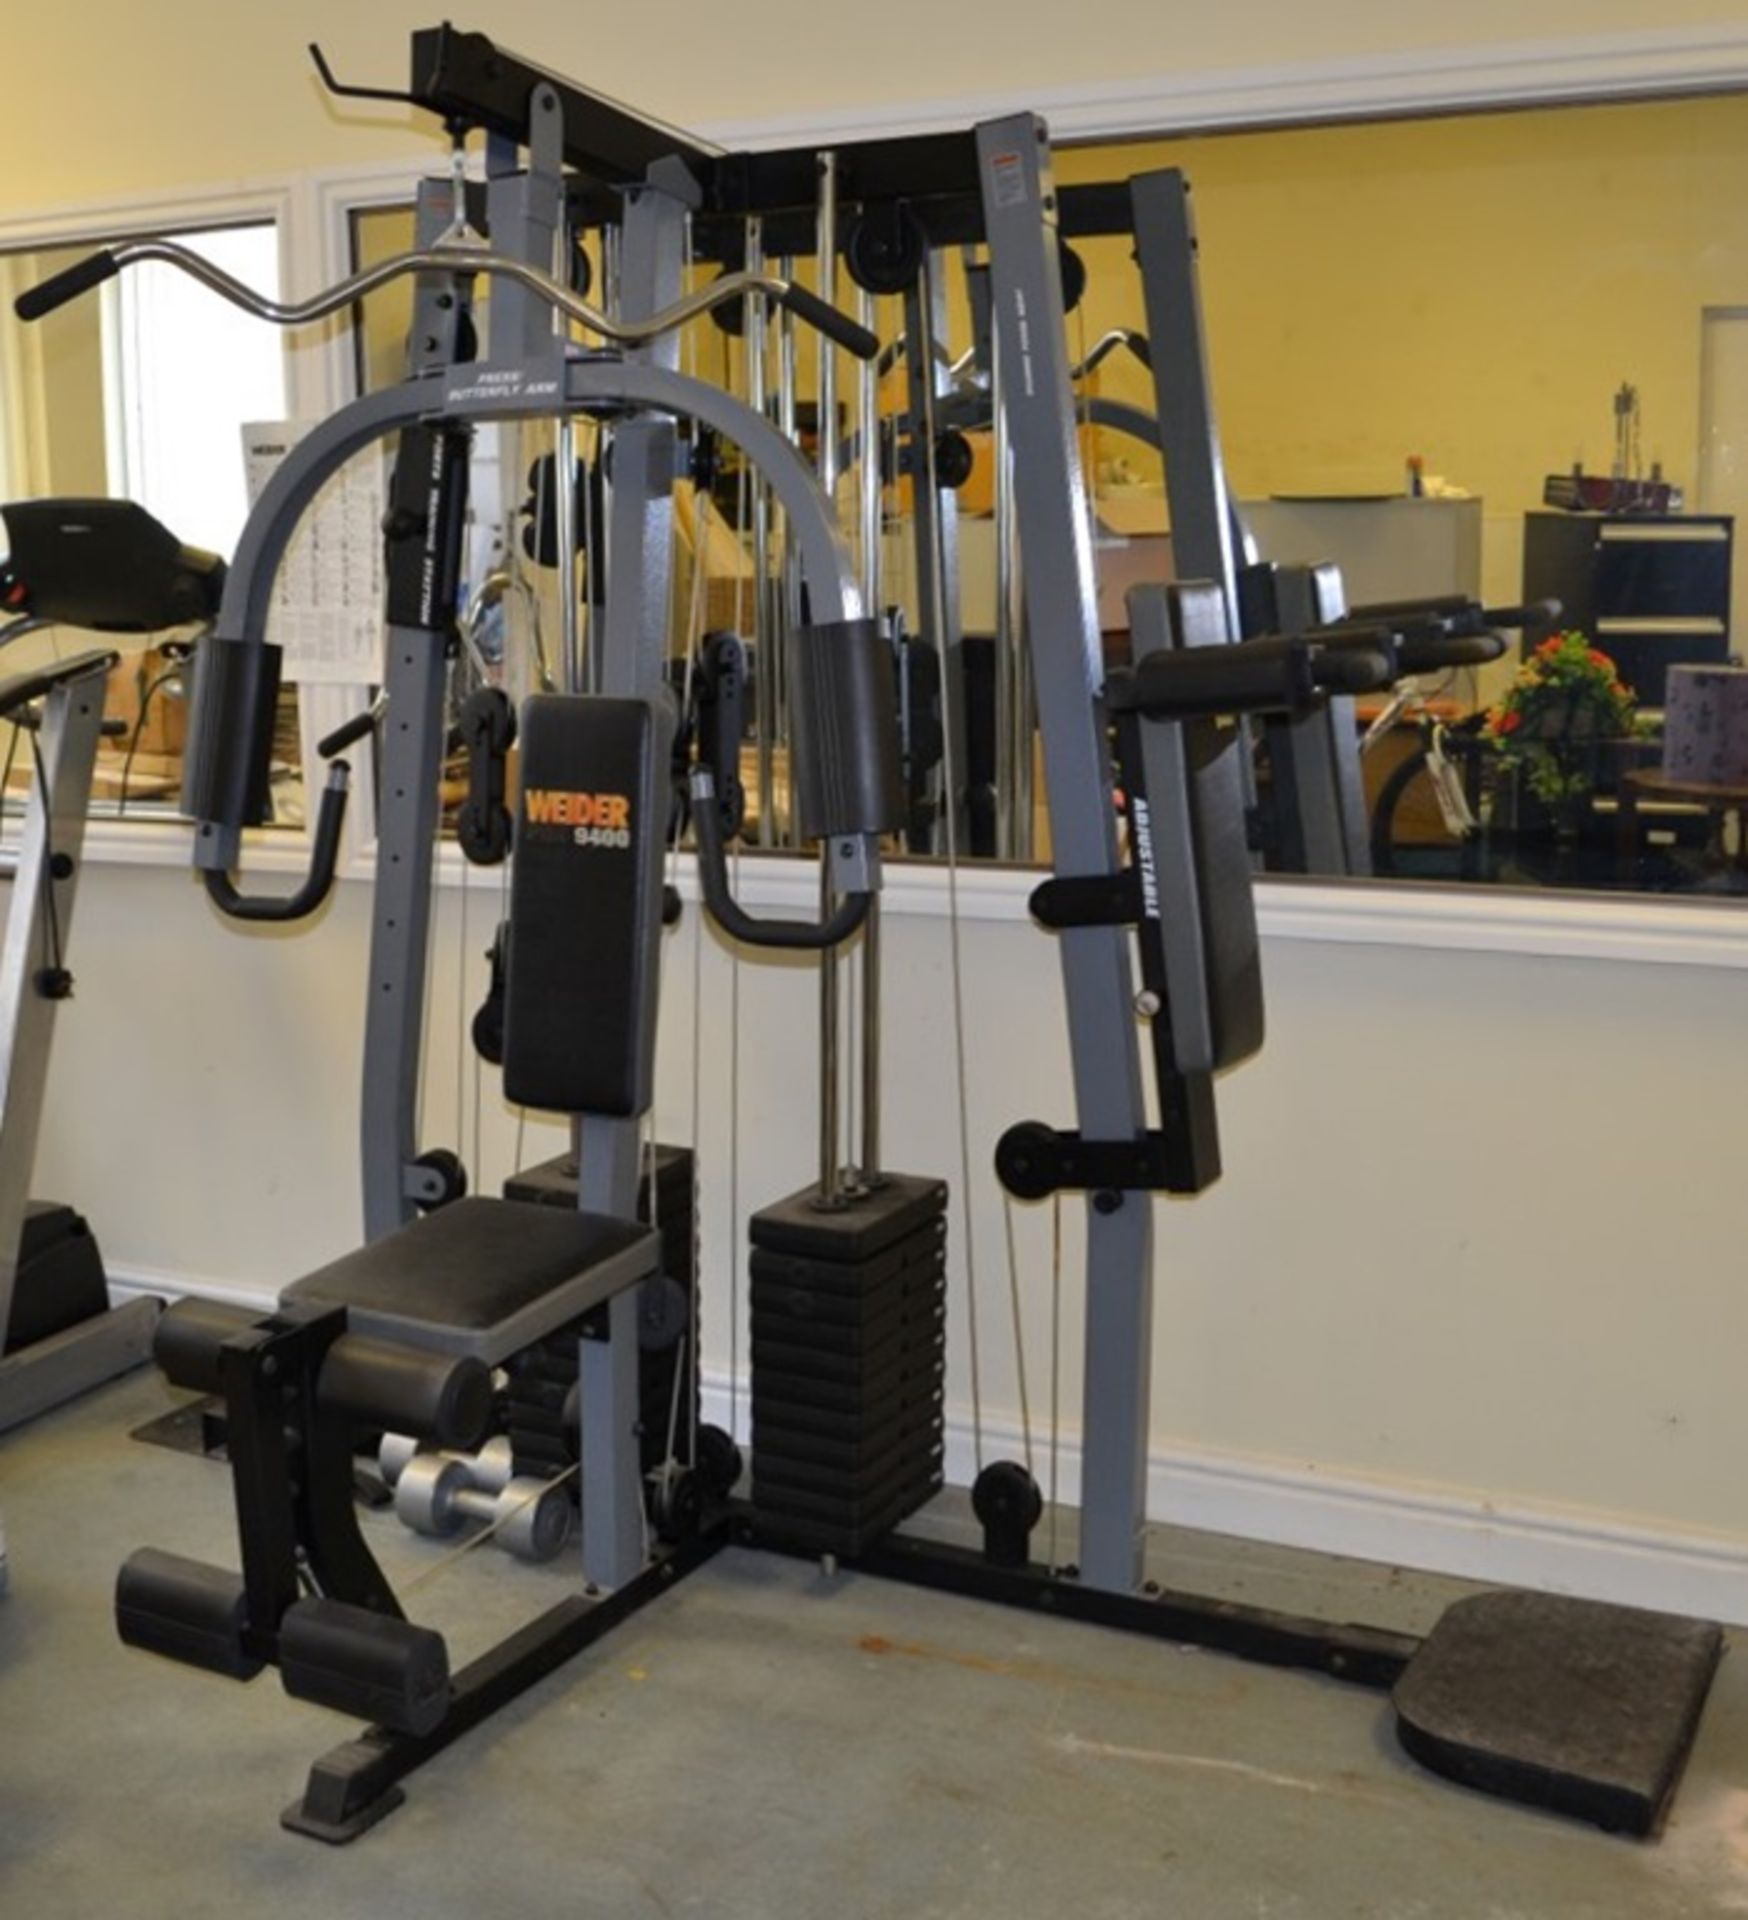 1 x Weider Pro 9400 Multi Gym - From A Clean Manor House Environment In Good Working Condition - - Image 2 of 9